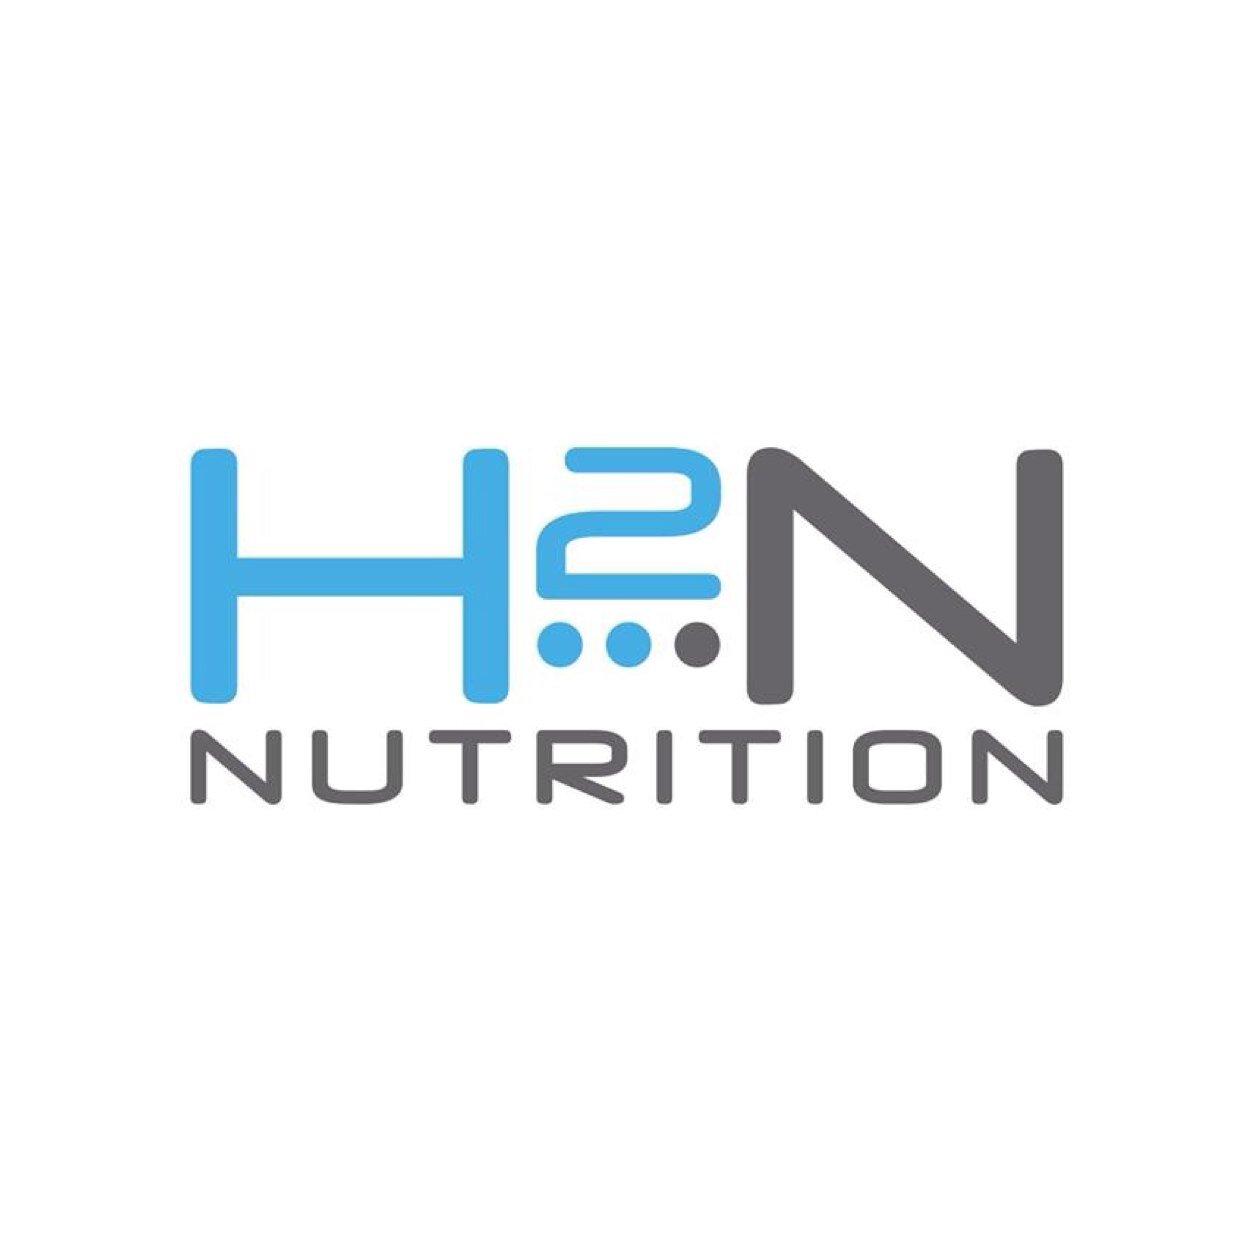 We deliver innovative sports nutrition that taste great and have been proven to work.